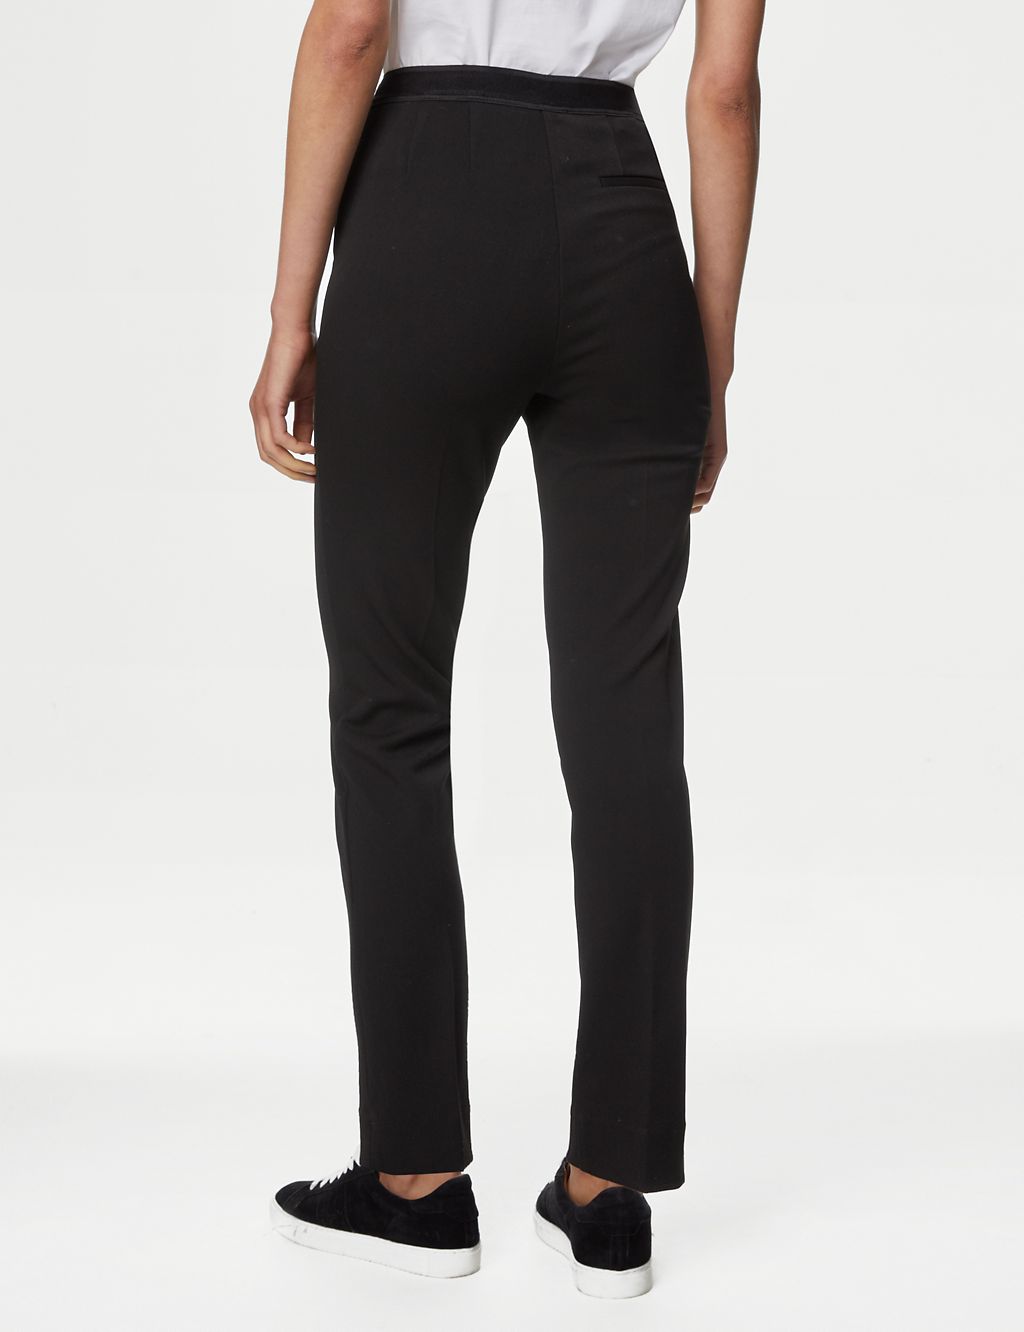 Slim Fit Ankle Grazer Trousers | M&S Collection | M&S